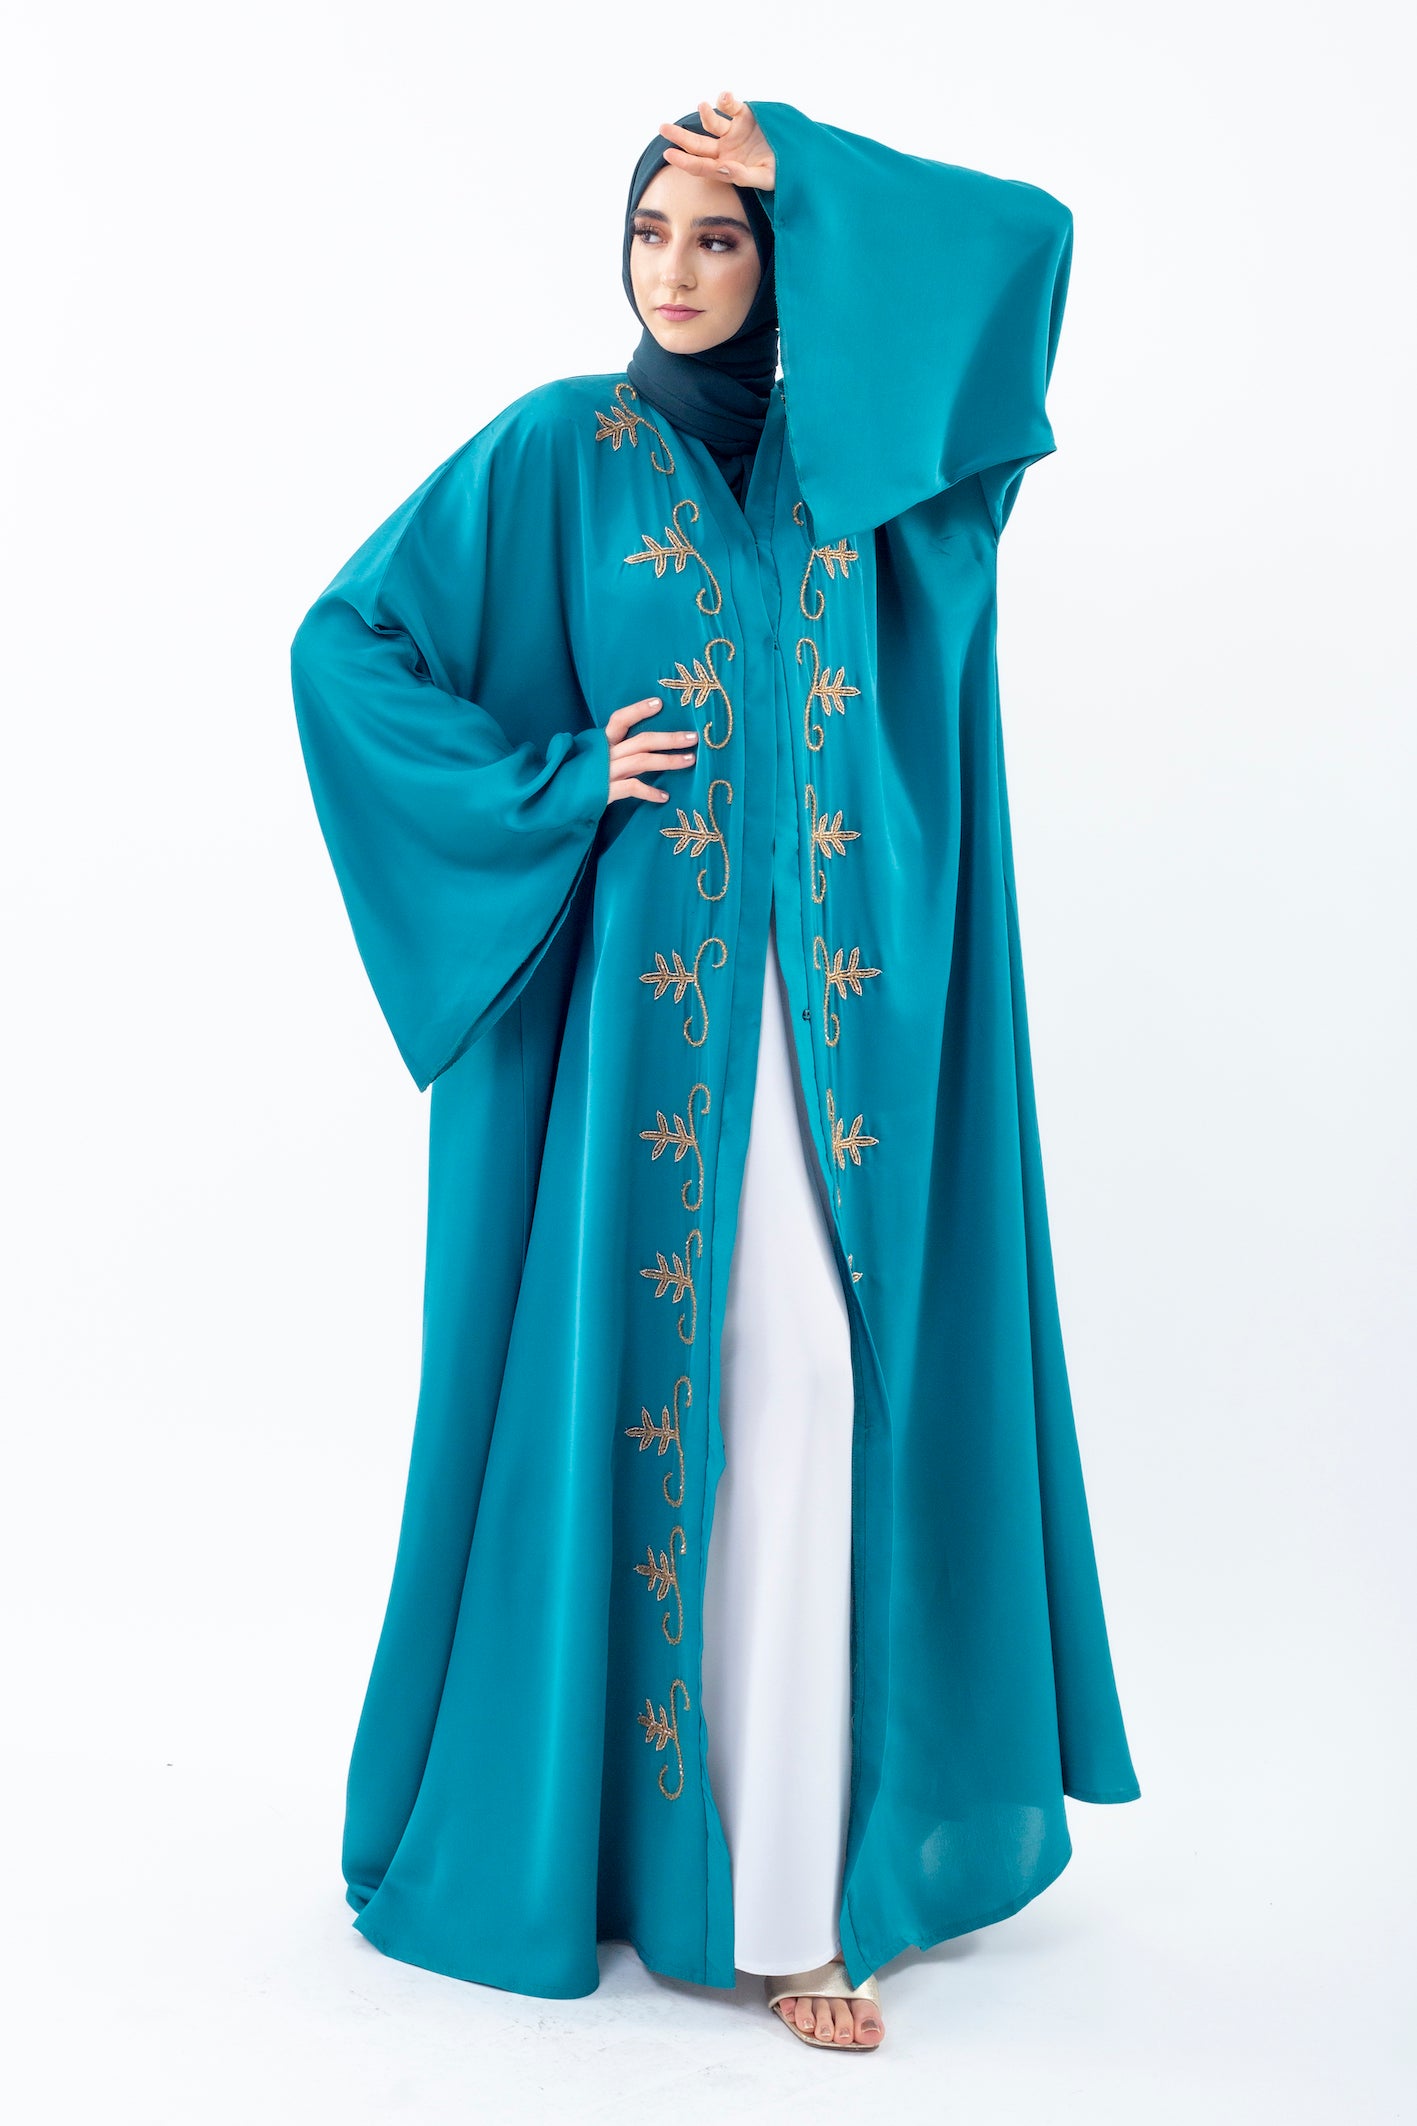 The Open Abaya: A Timeless Elegance and Modesty Unveiled